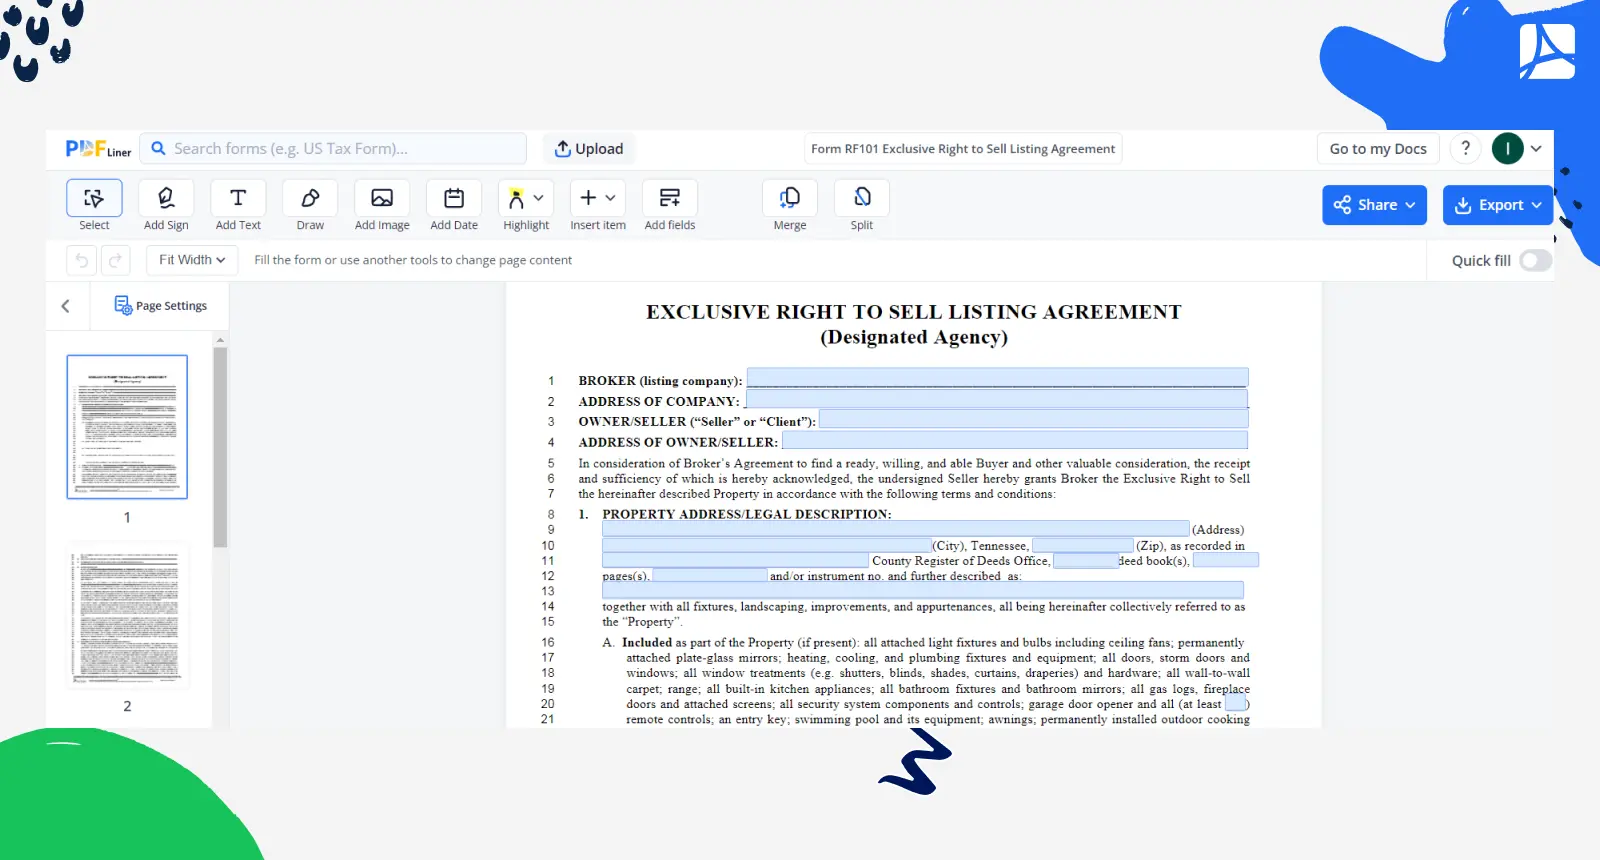 Exclusive Right to Sell Listing Agreement